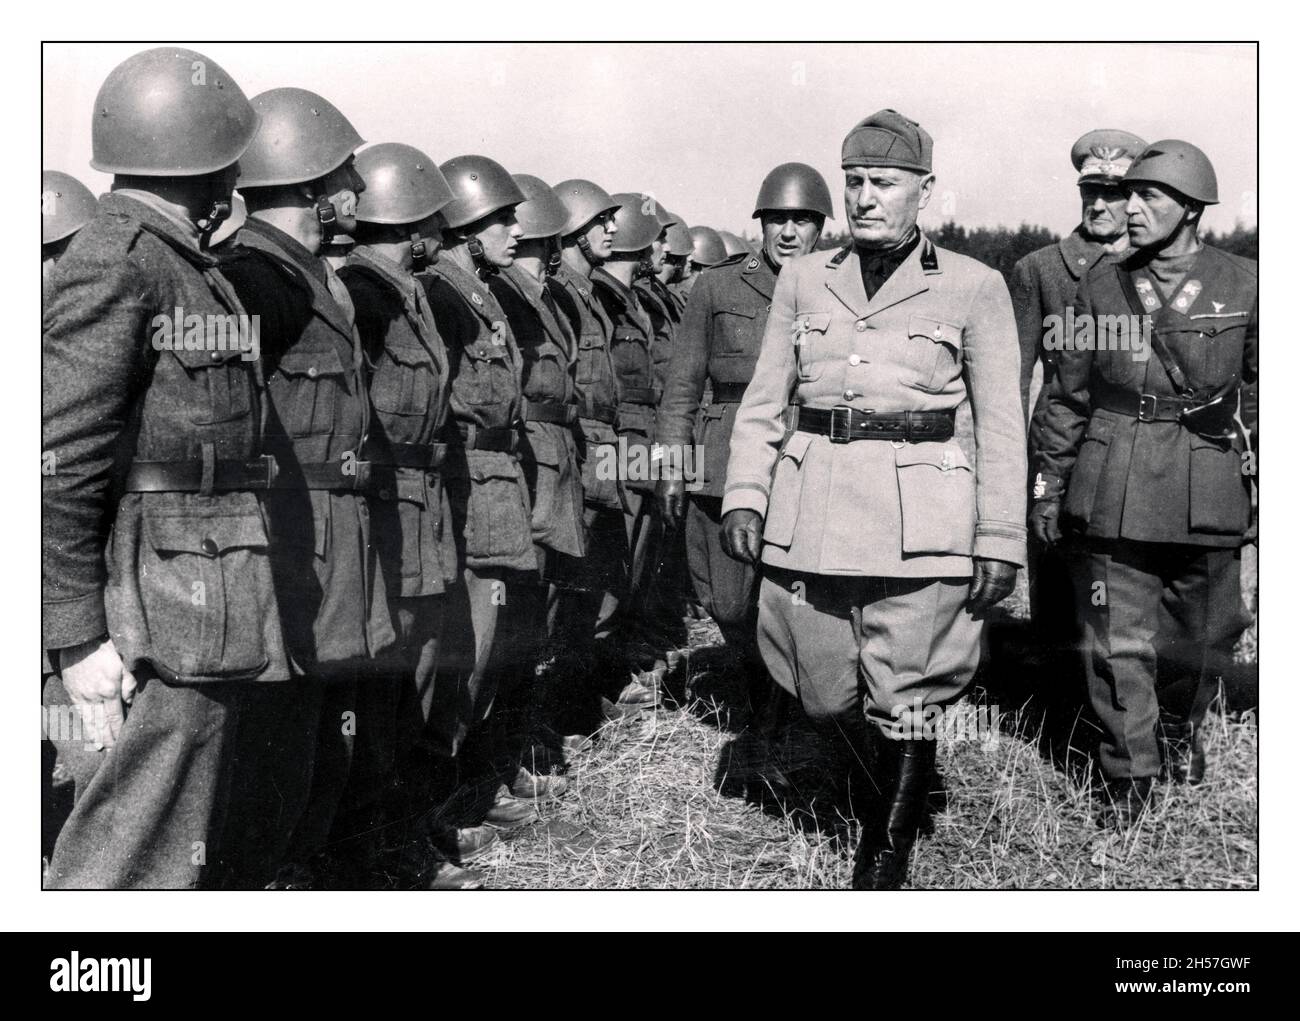 BENITO MUSSOLINI REVIEWING HIS TROOPS (1883-1945)  Italian dictator and leader of the Fascist movement and part of the WW2 Axis,  'EL DUCE'  In his military uniform with his Generals inspecting a line of Italian troops during World War II 1942 Facist Propaganda image Stock Photo